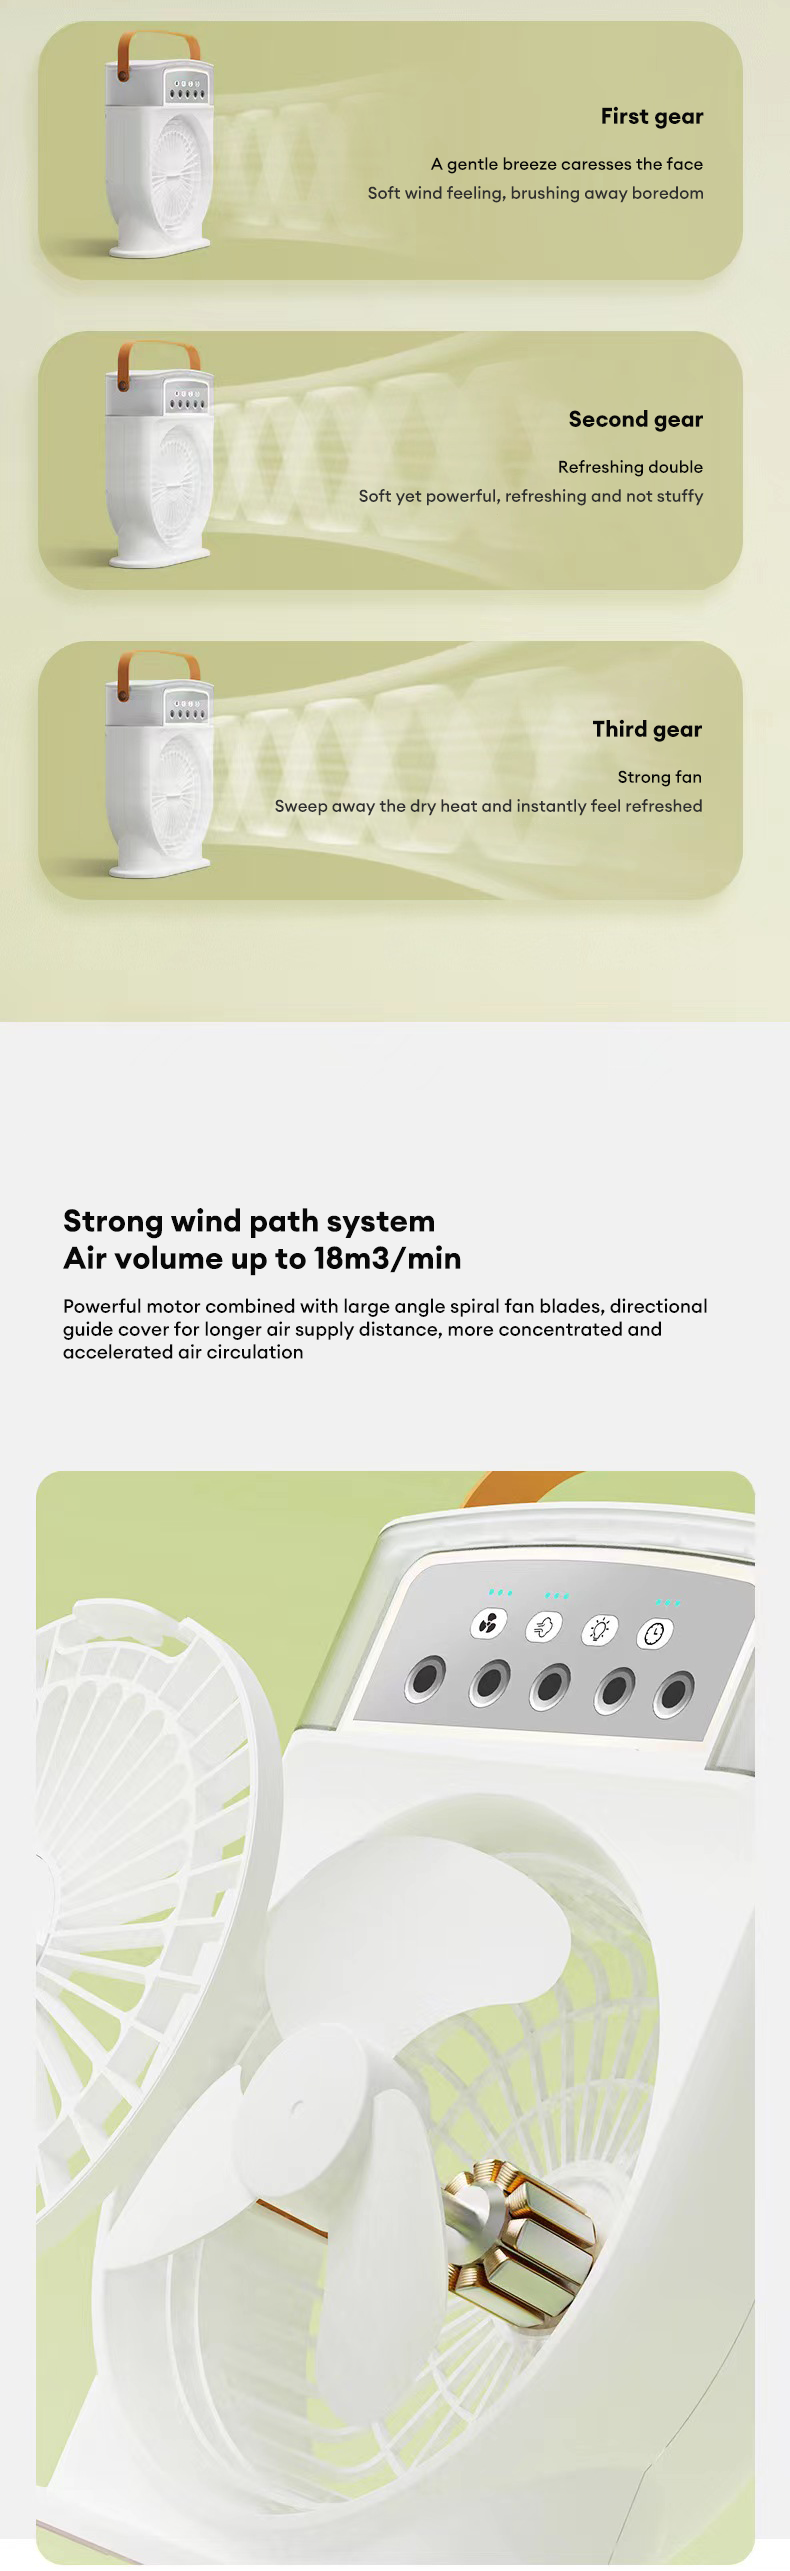 USB Portable Air Conditioner - 5 Spray, 7-Color Light, 600ML Water Tank, Cooling Mist Fan & Humidifier